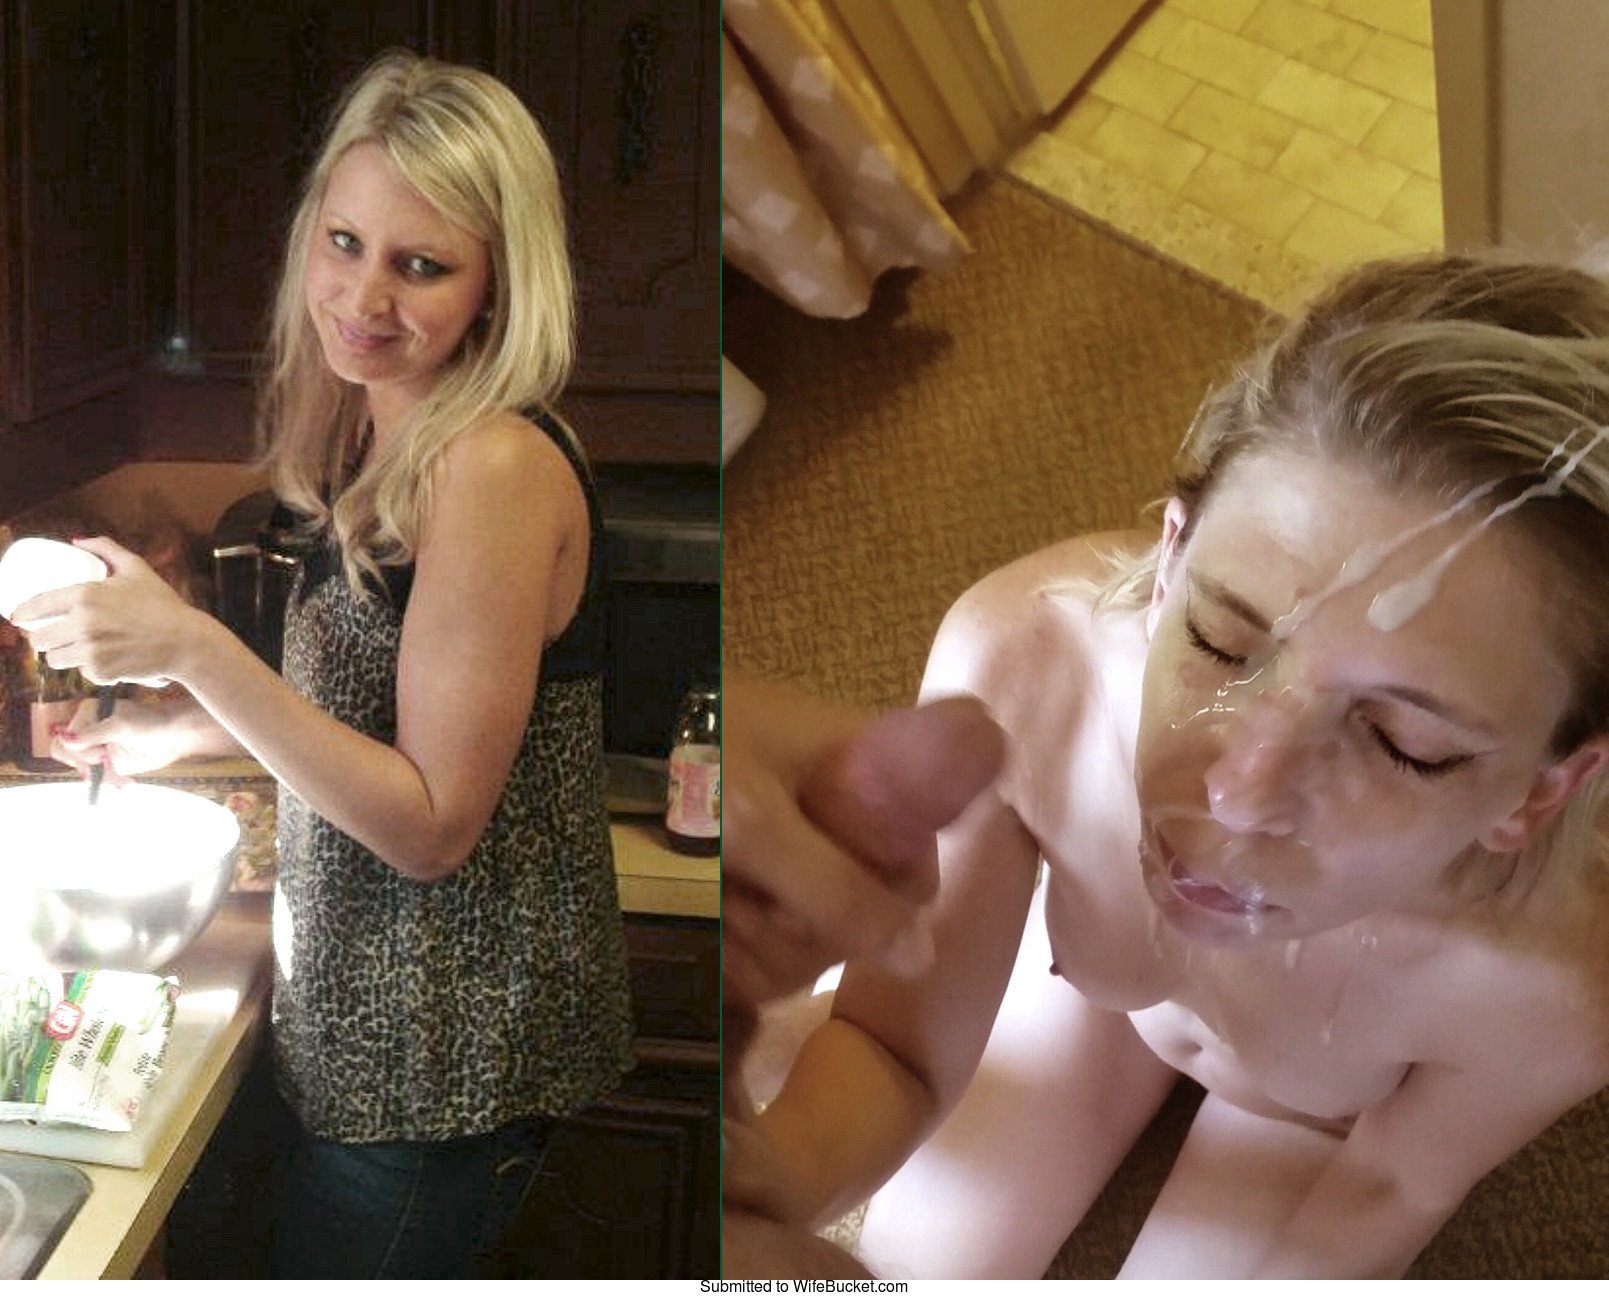 6 Amateur Pics Before And After The Facial Cumshot WifeBuc